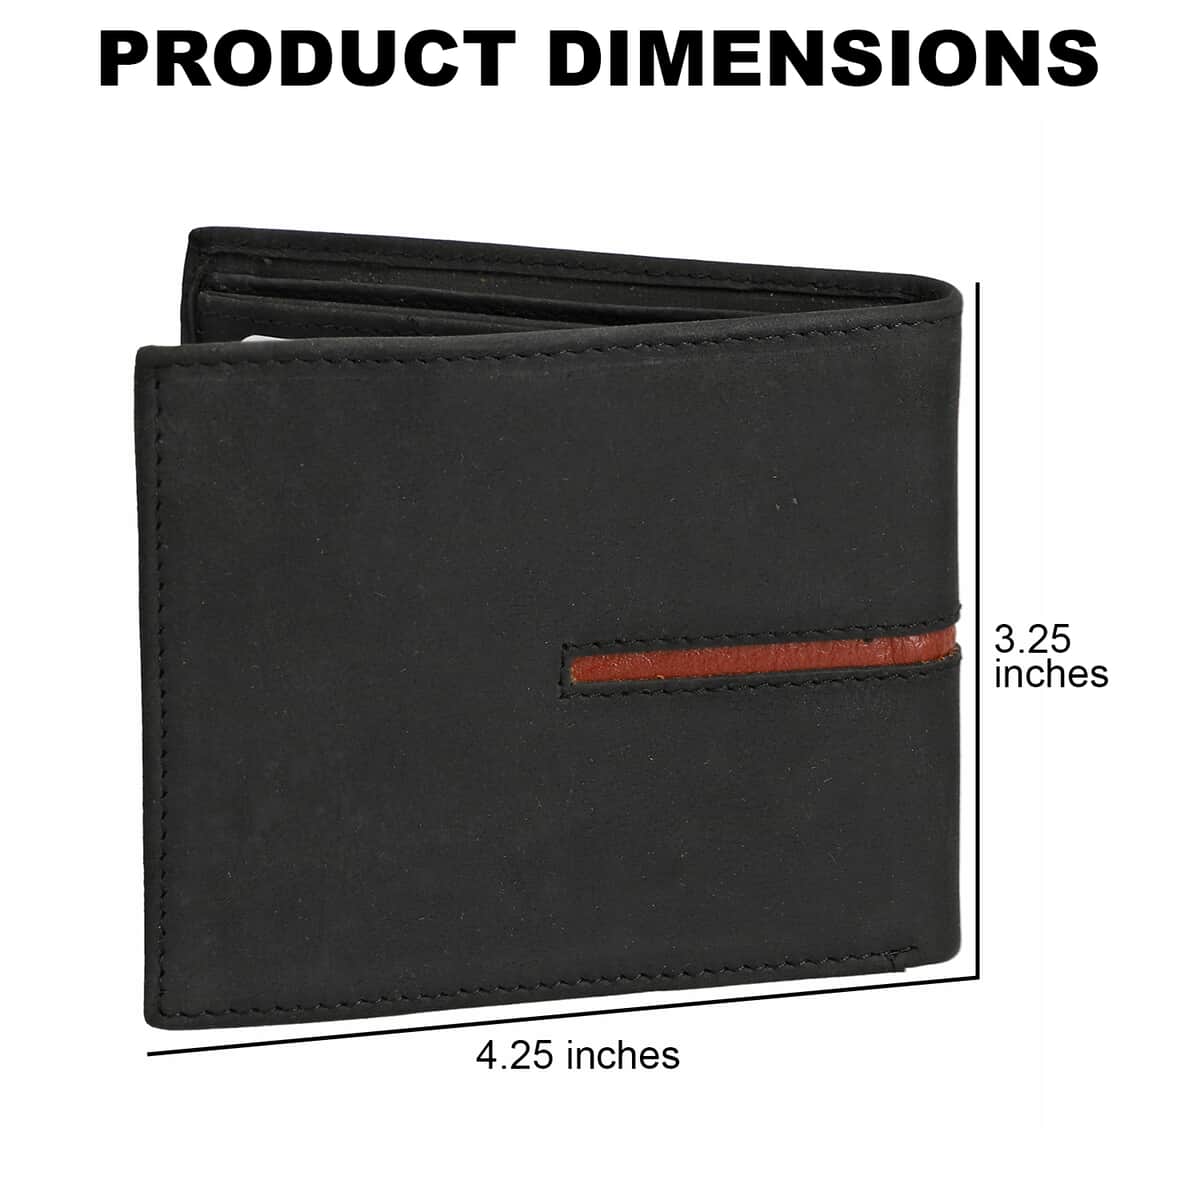 "UNION CODE Genuine Leather Bi Fold Men's Wallet (RFID Protected) SIZE: 4.25(L)x3.25(H) inches COLOR: Black" image number 3